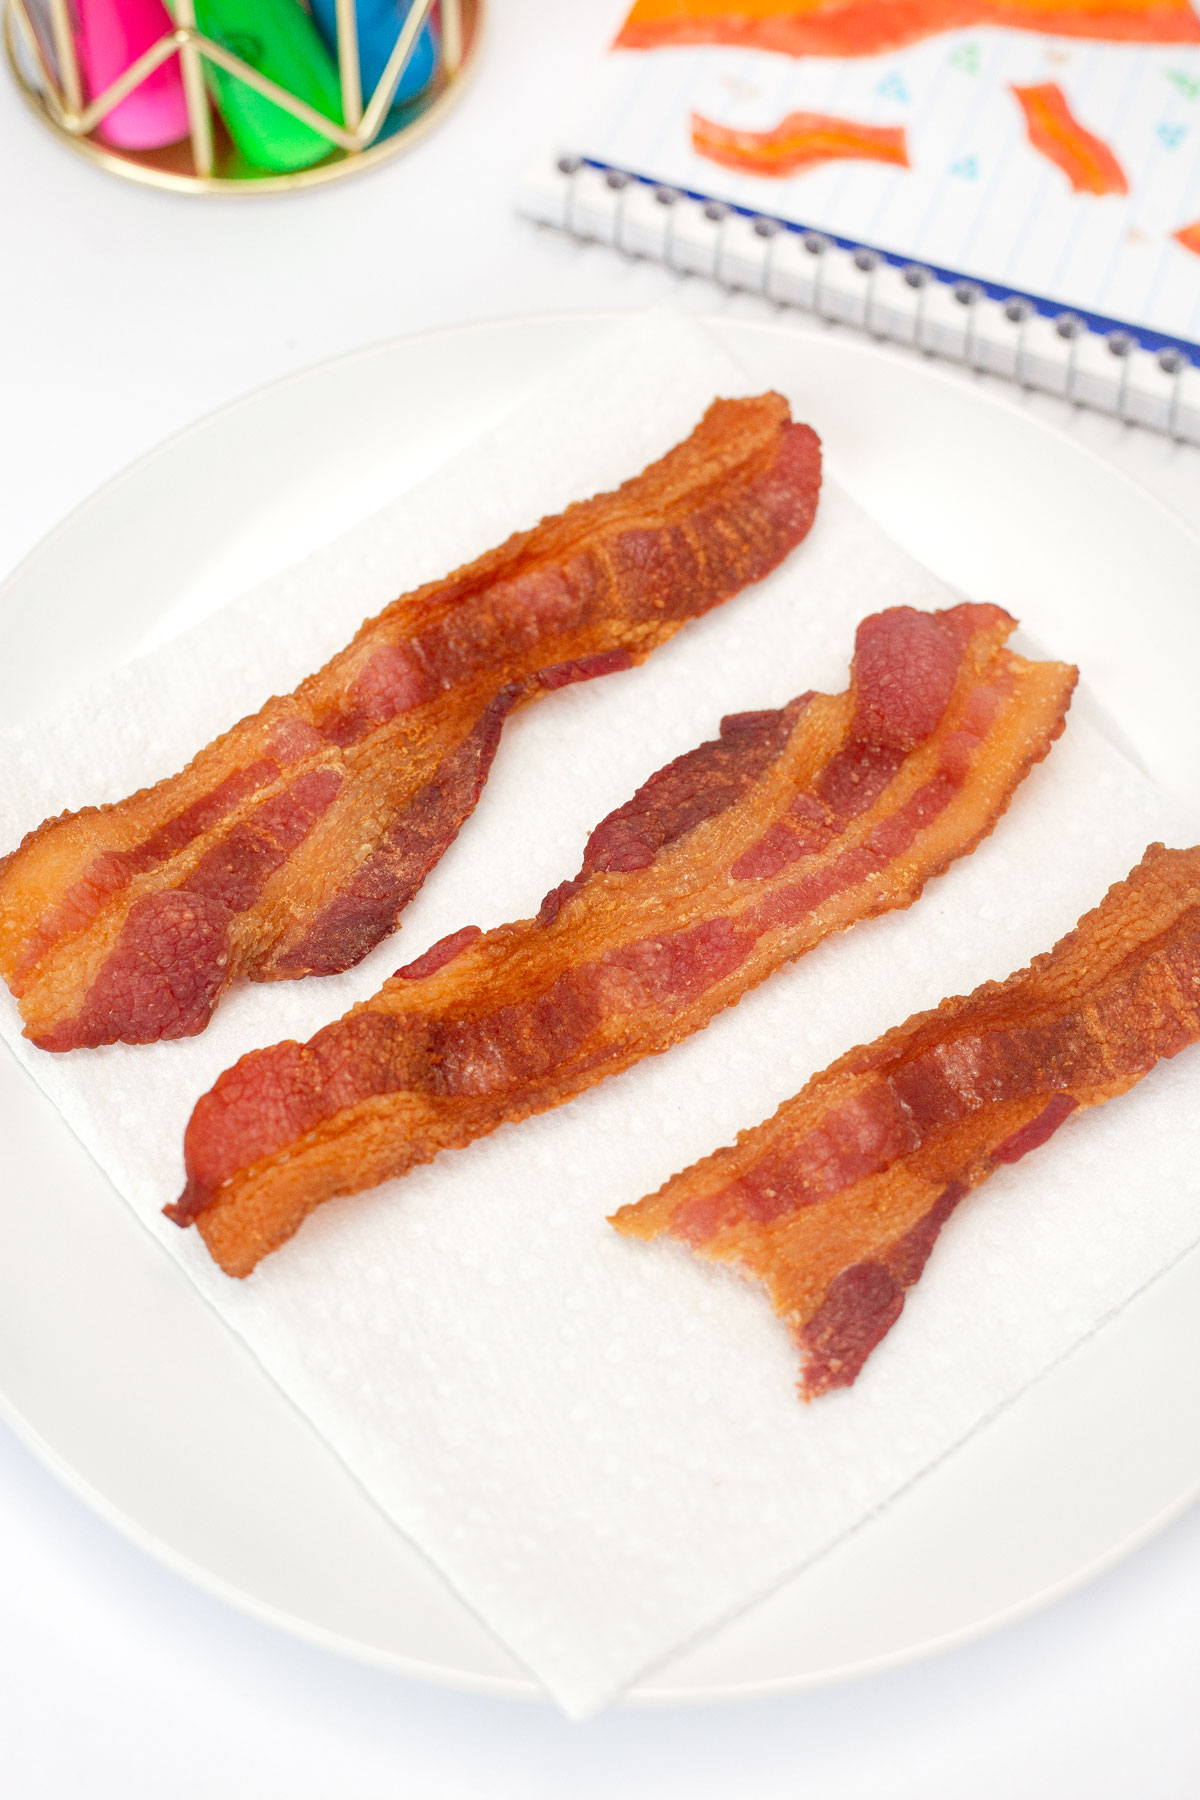 Microwave Bacon on plate after cooking